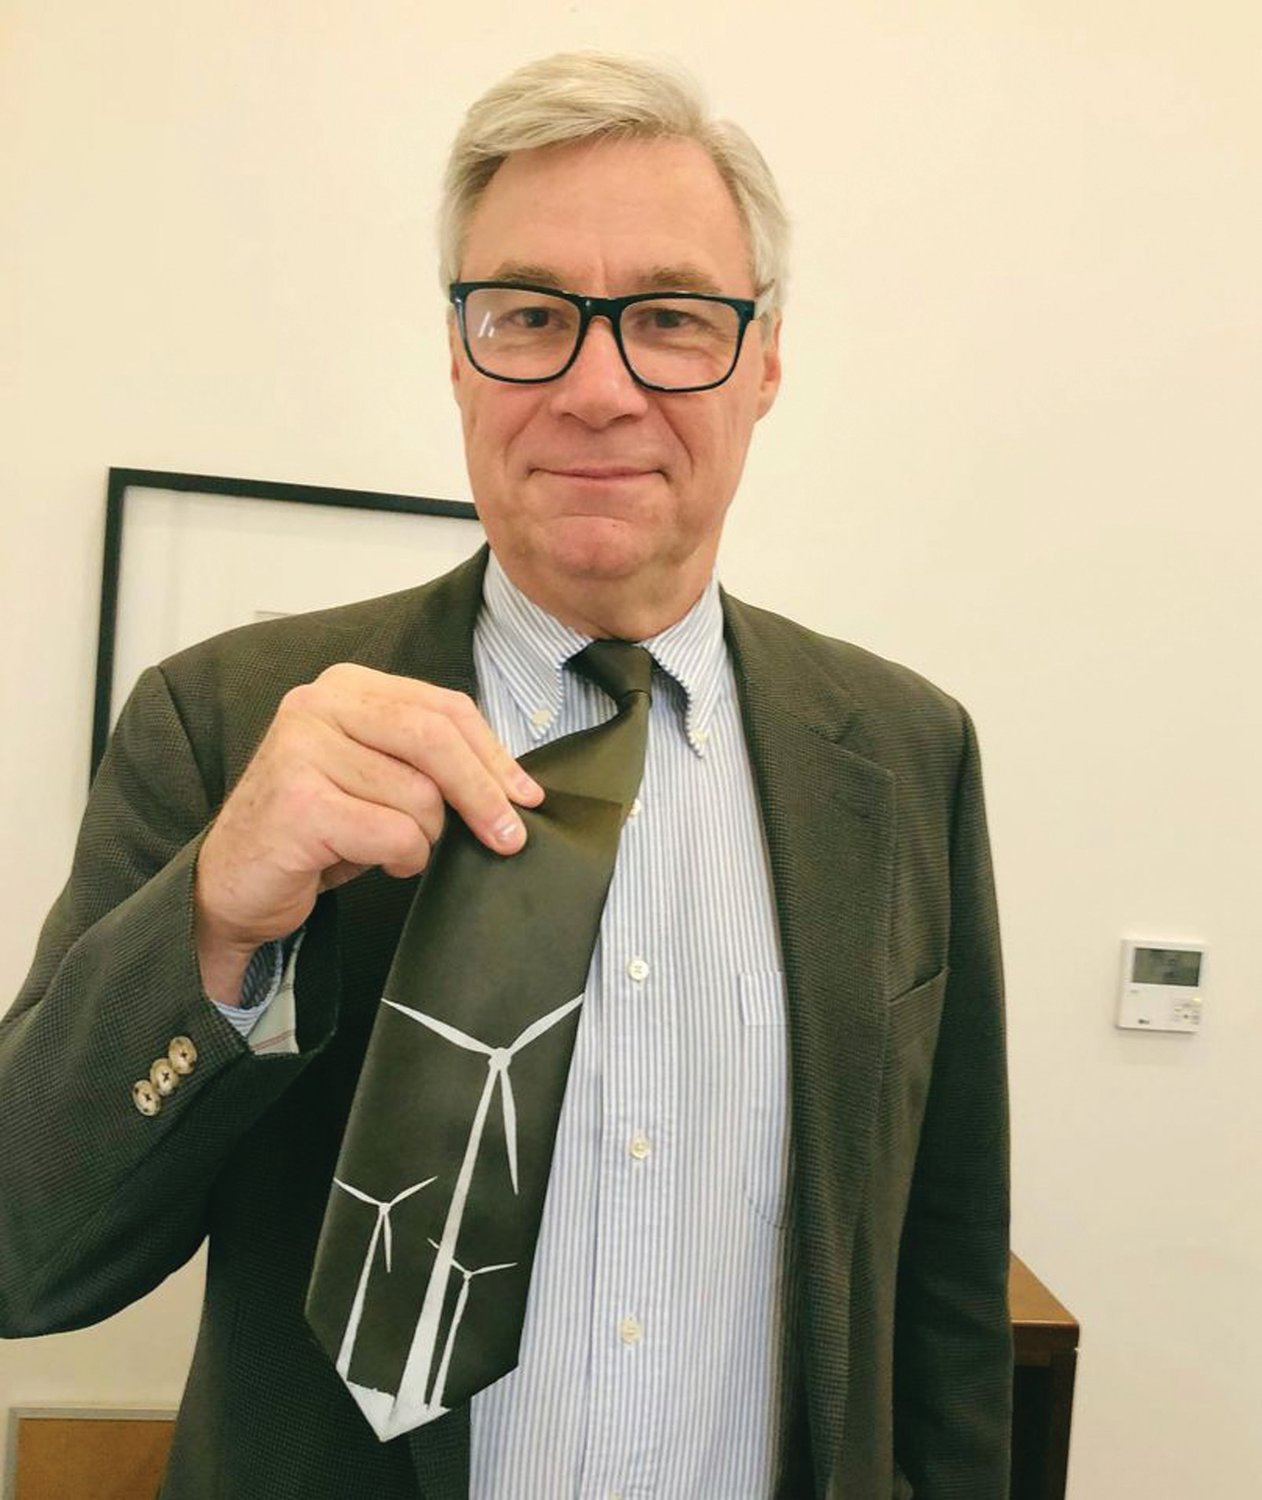 THE PERFECT TIE: Senator Sheldon Whitehouse said, “A special shout out to my friend Congressman Jim Langevin who gave me the perfect tie for EEO Leaders Day!”  A tie depicting a wind farm. (Submitted photos)